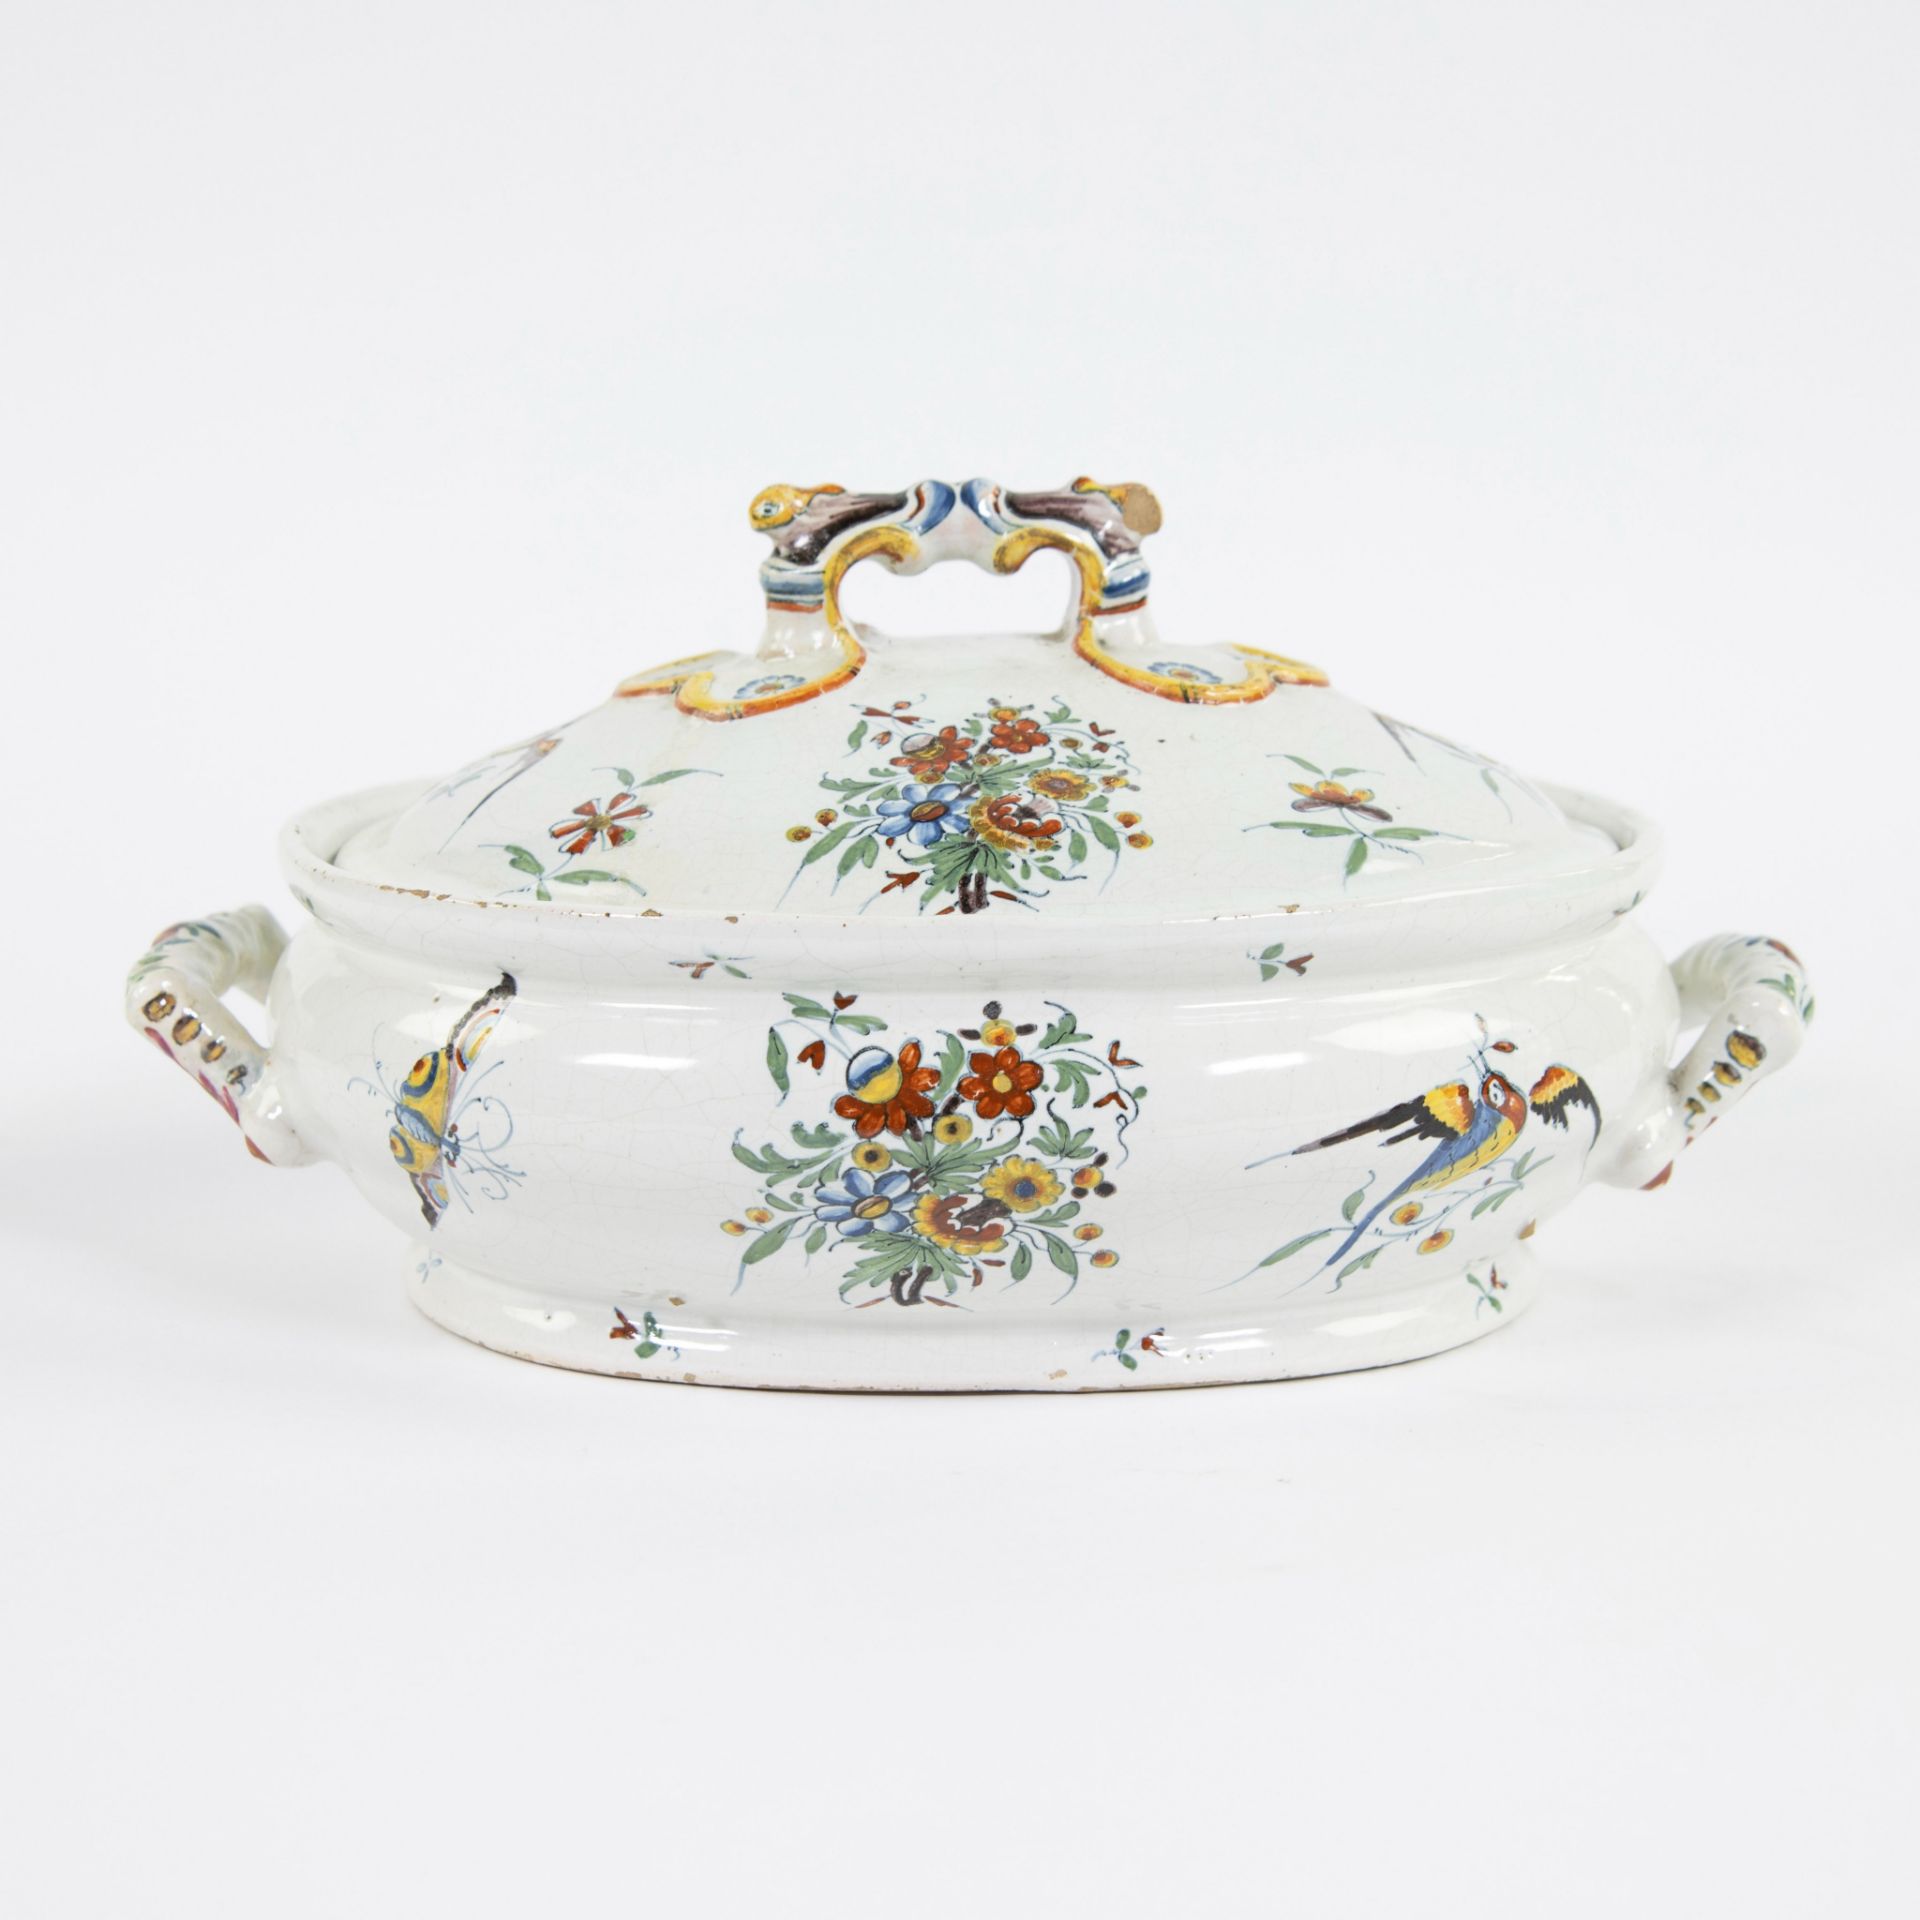 Very rare Brussels soup tureen in earthenware circa 1750